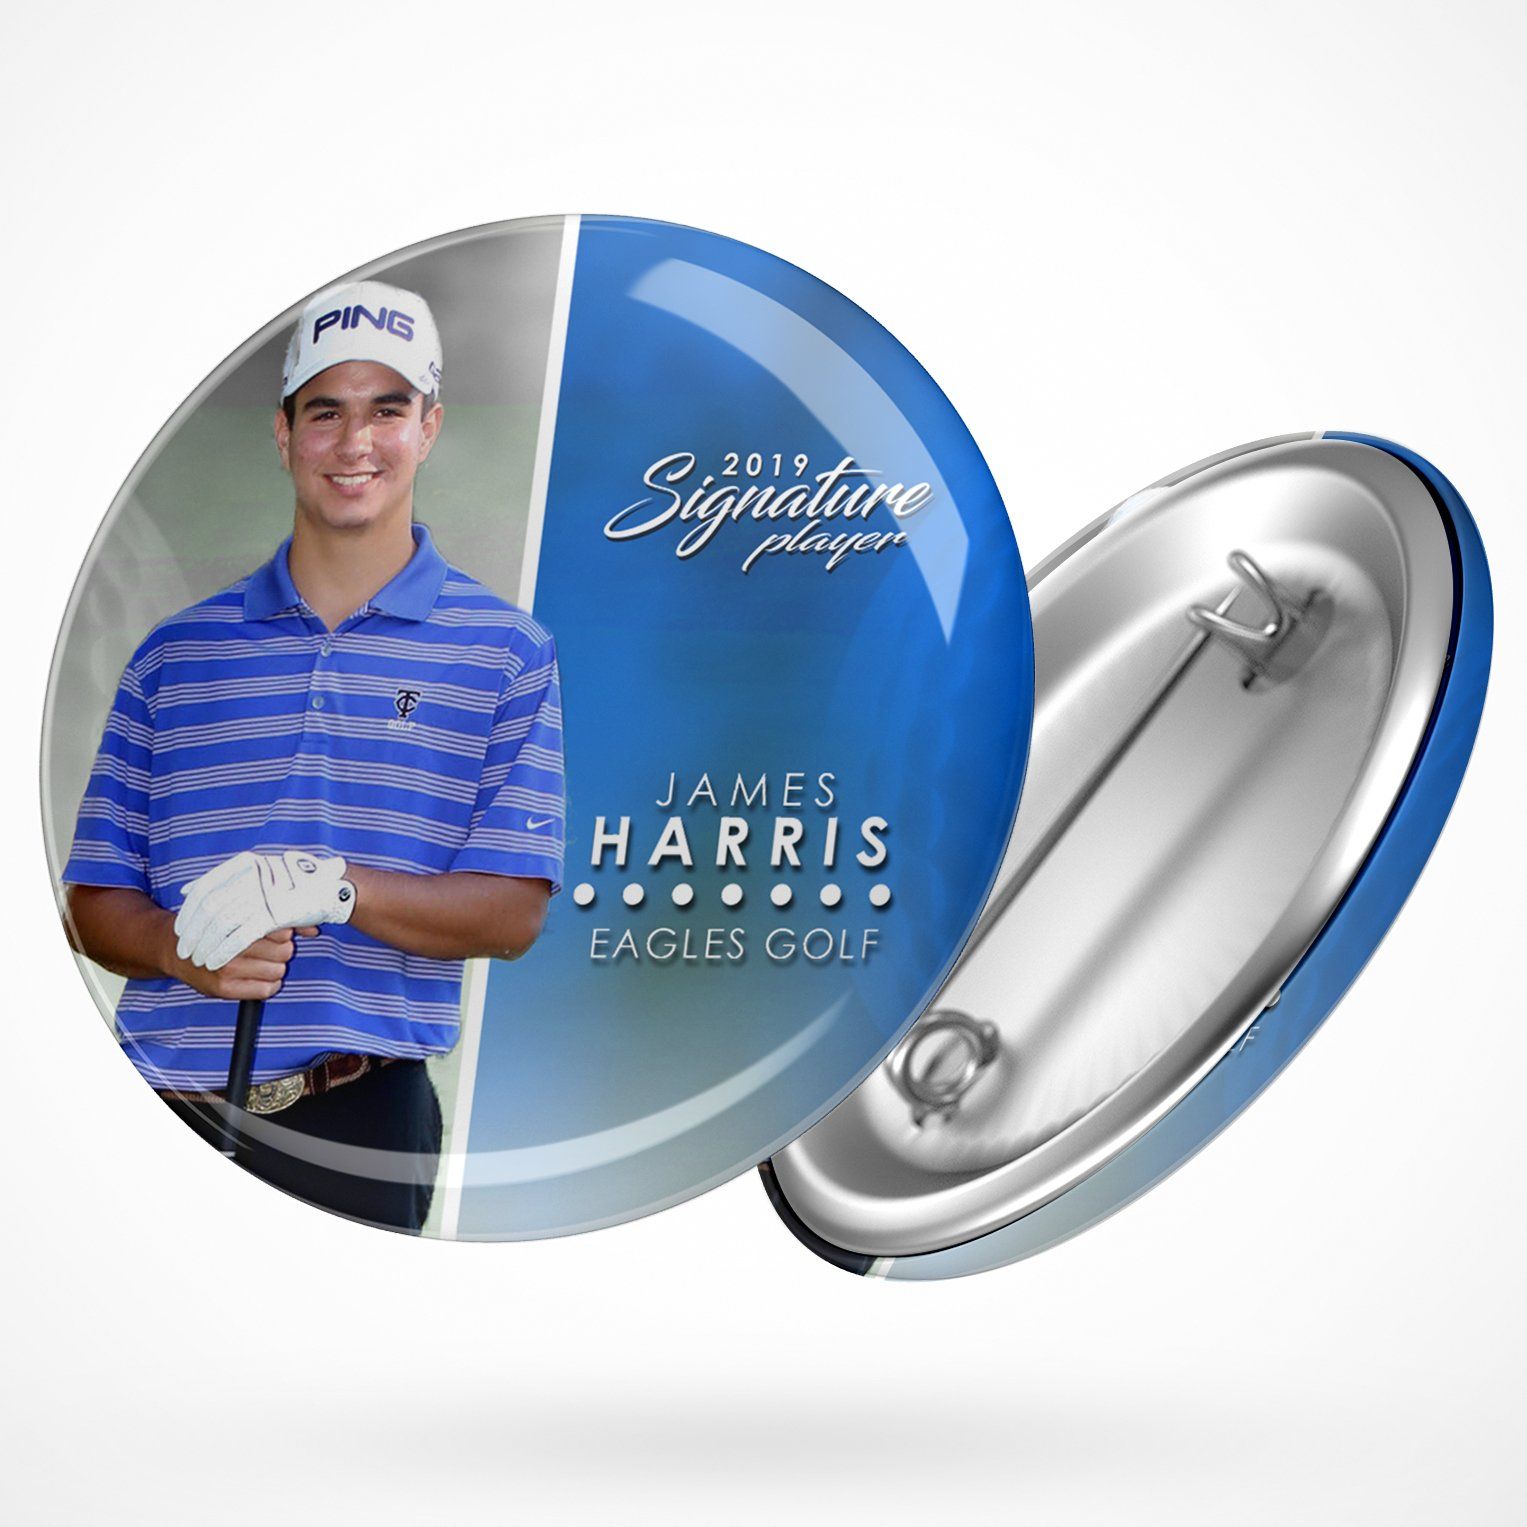 Signature Player - Golf - V1 - Extraction Button Template-Photoshop Template - Photo Solutions